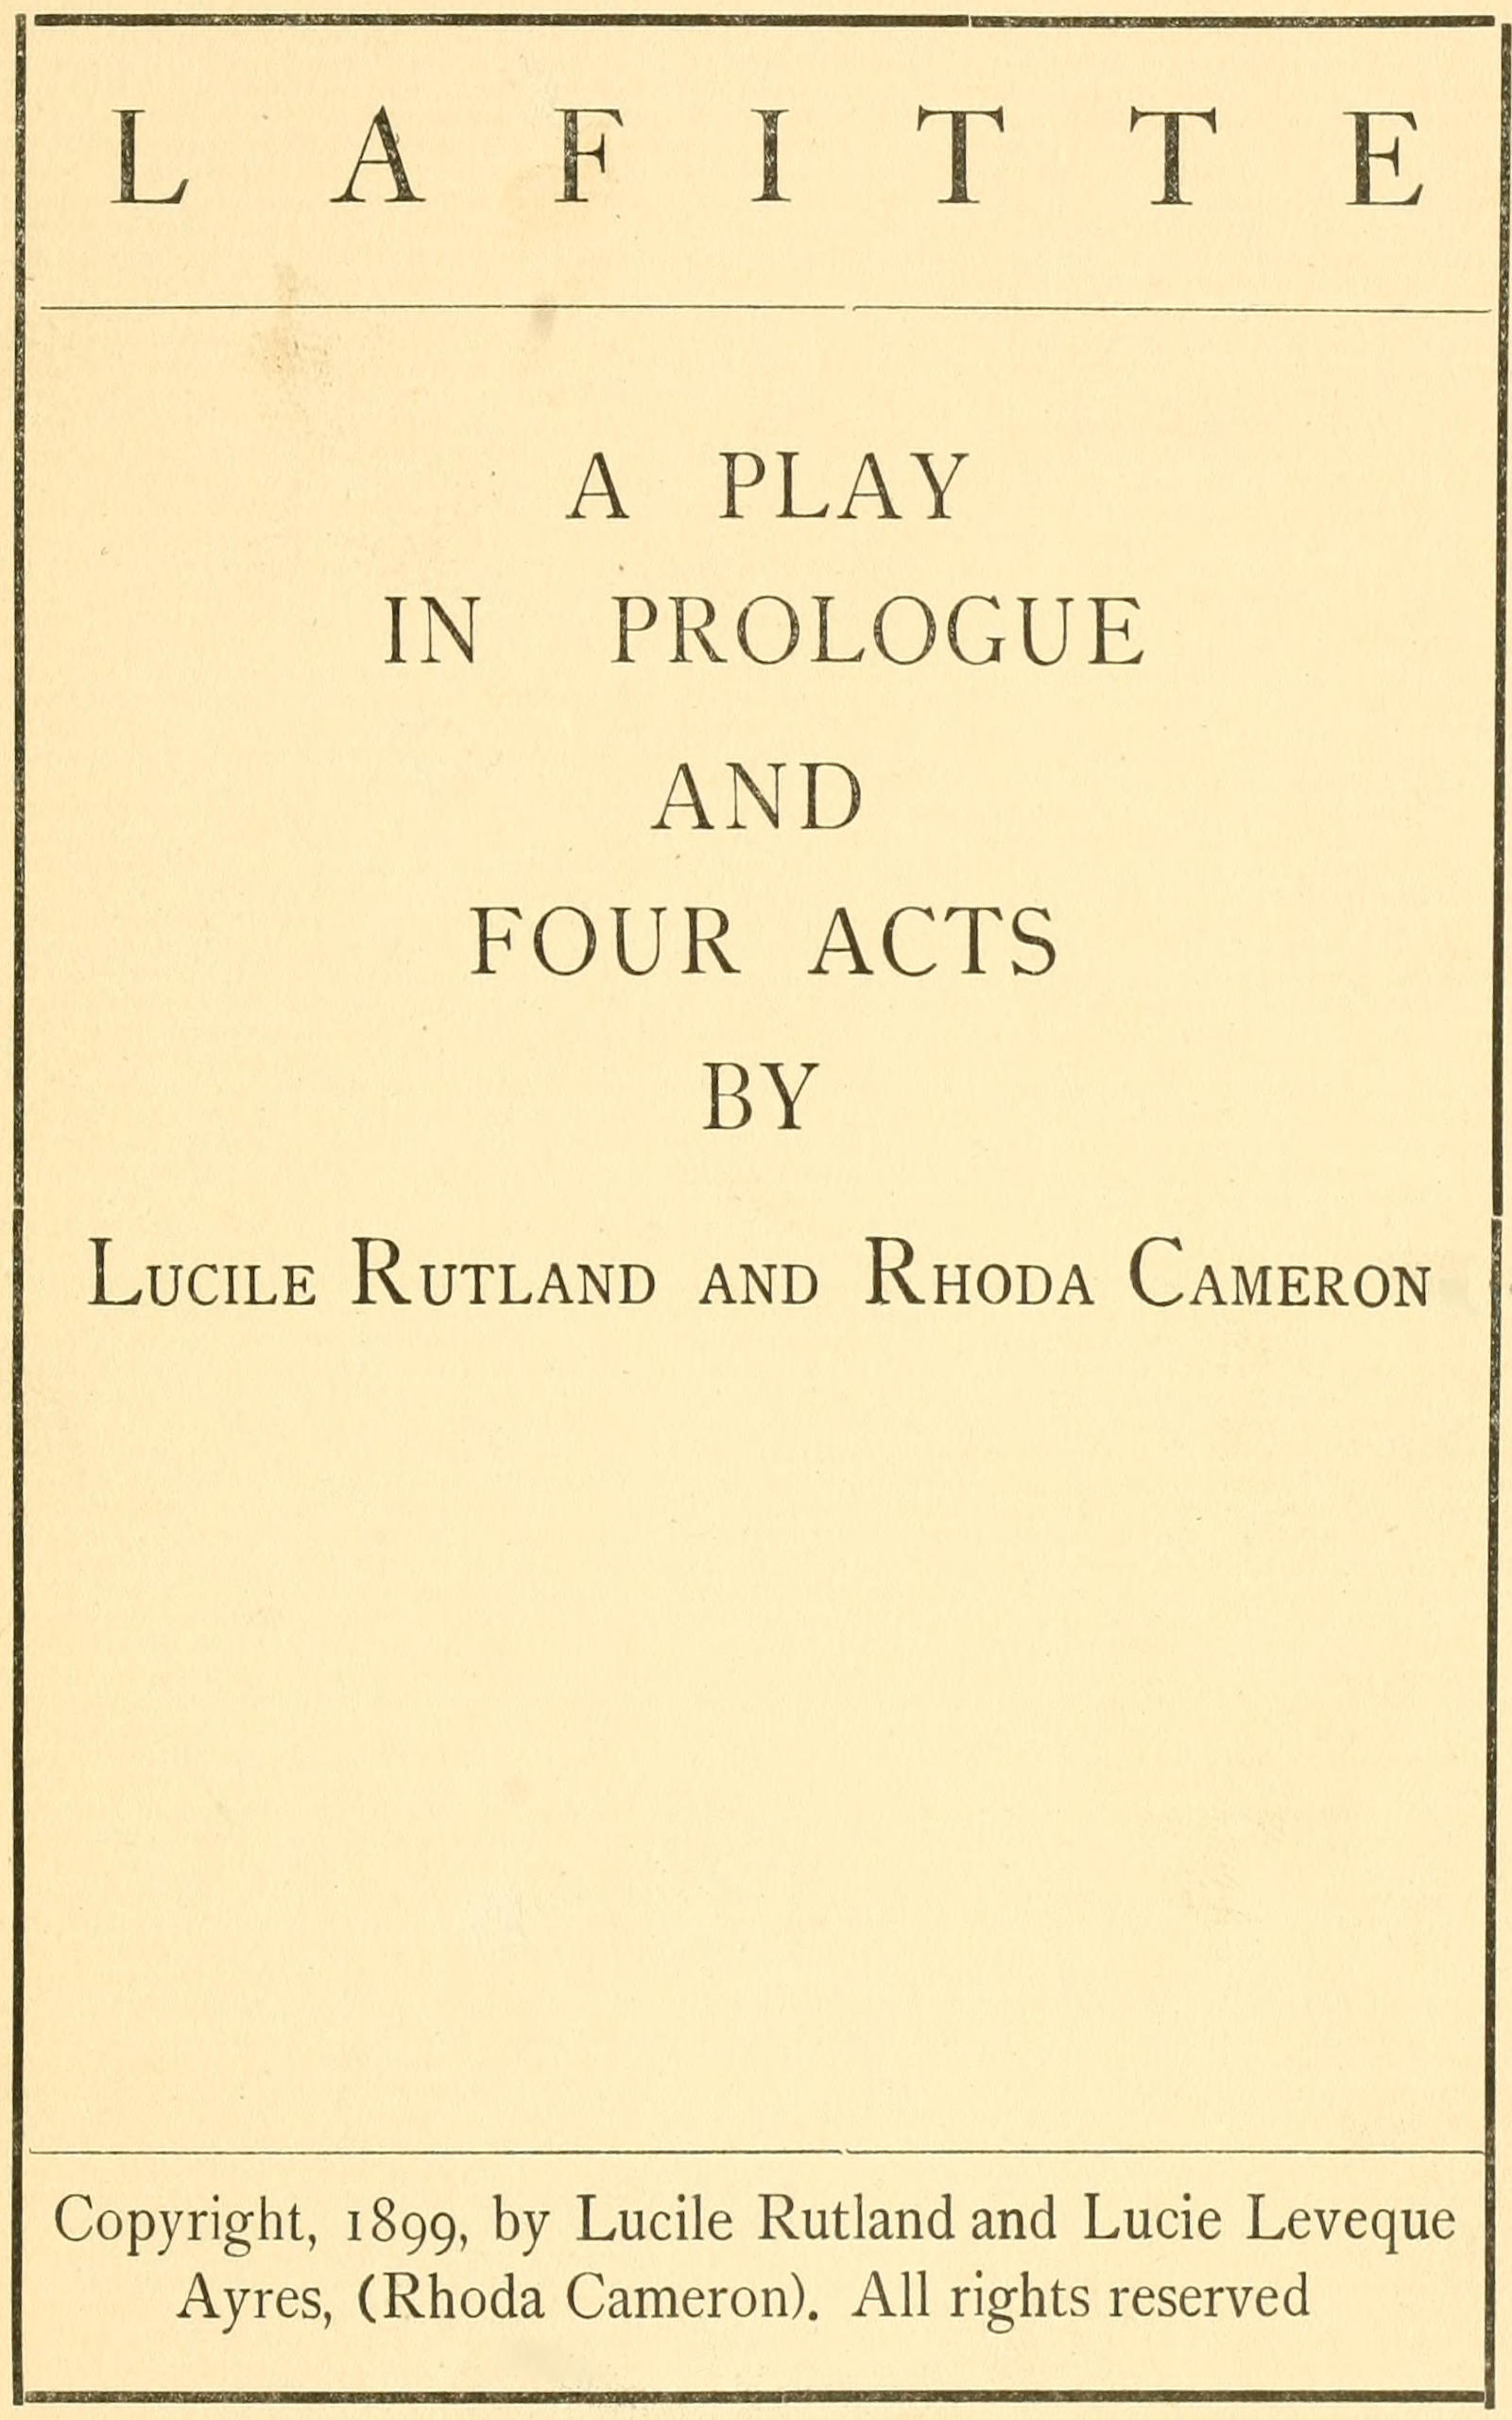 Lafitte, a play in prologue and four acts